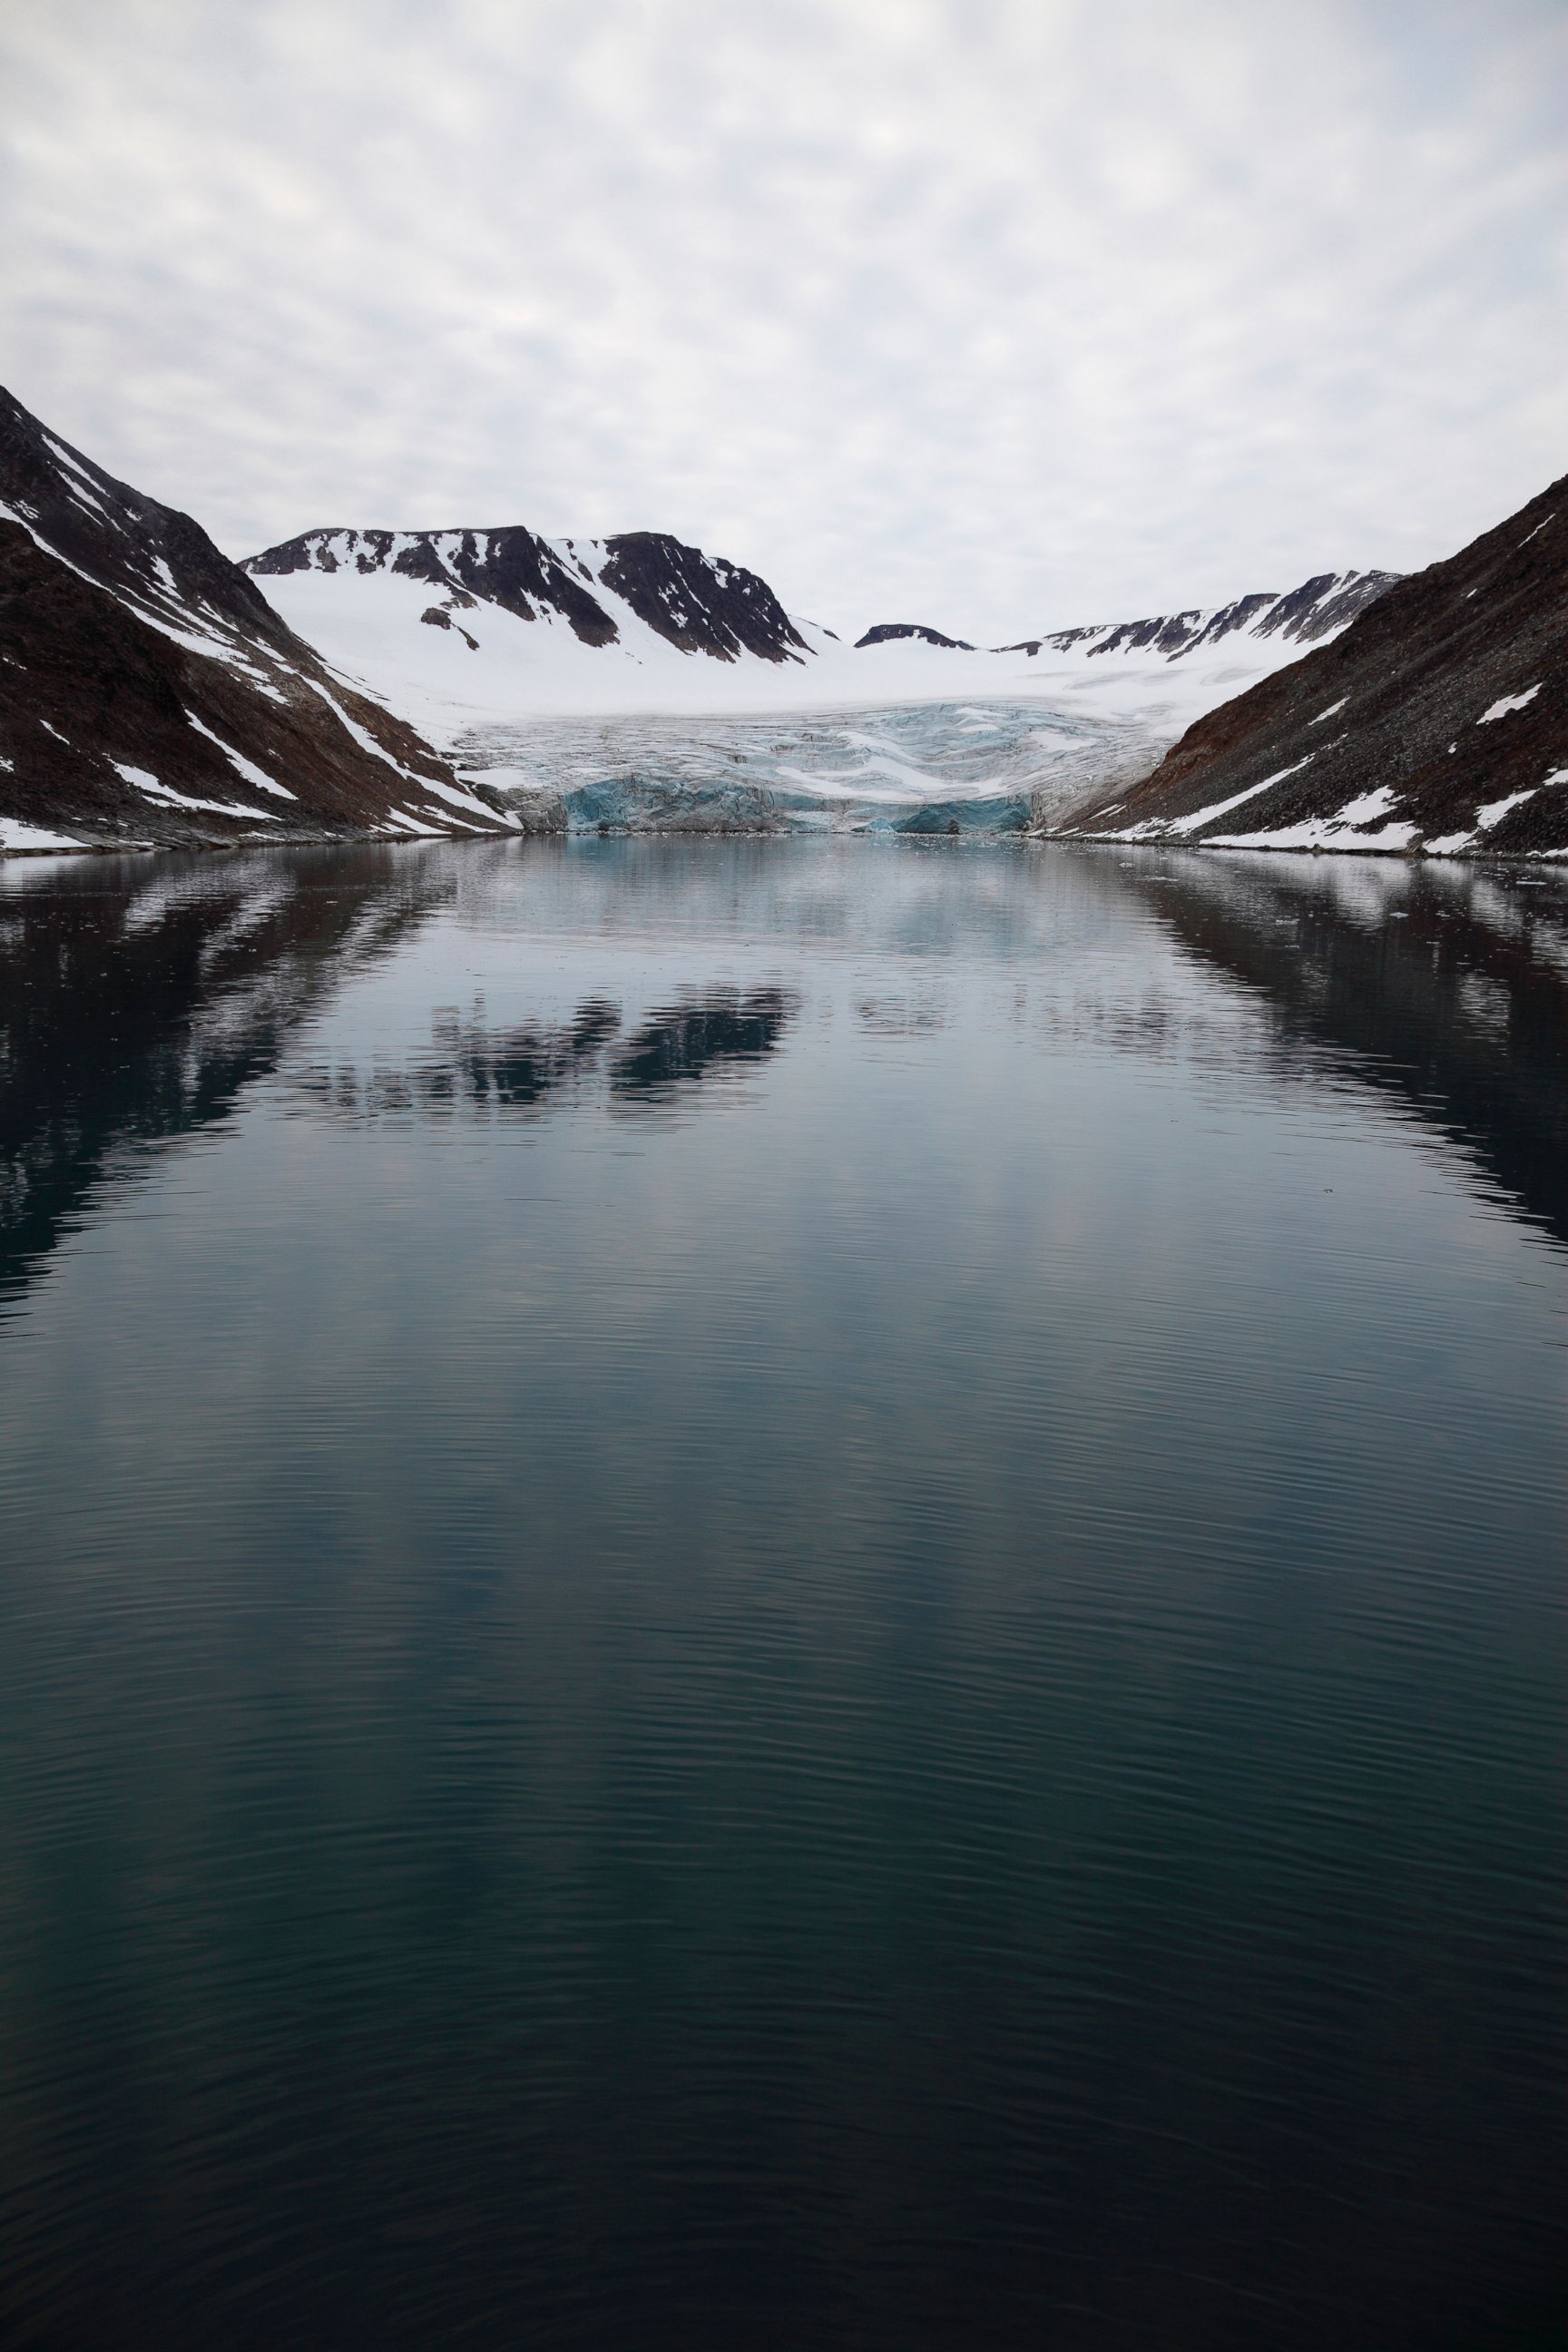 PHOTO: A glacier in the Artic Ocean near Norway is pictured in this undated stock photo.